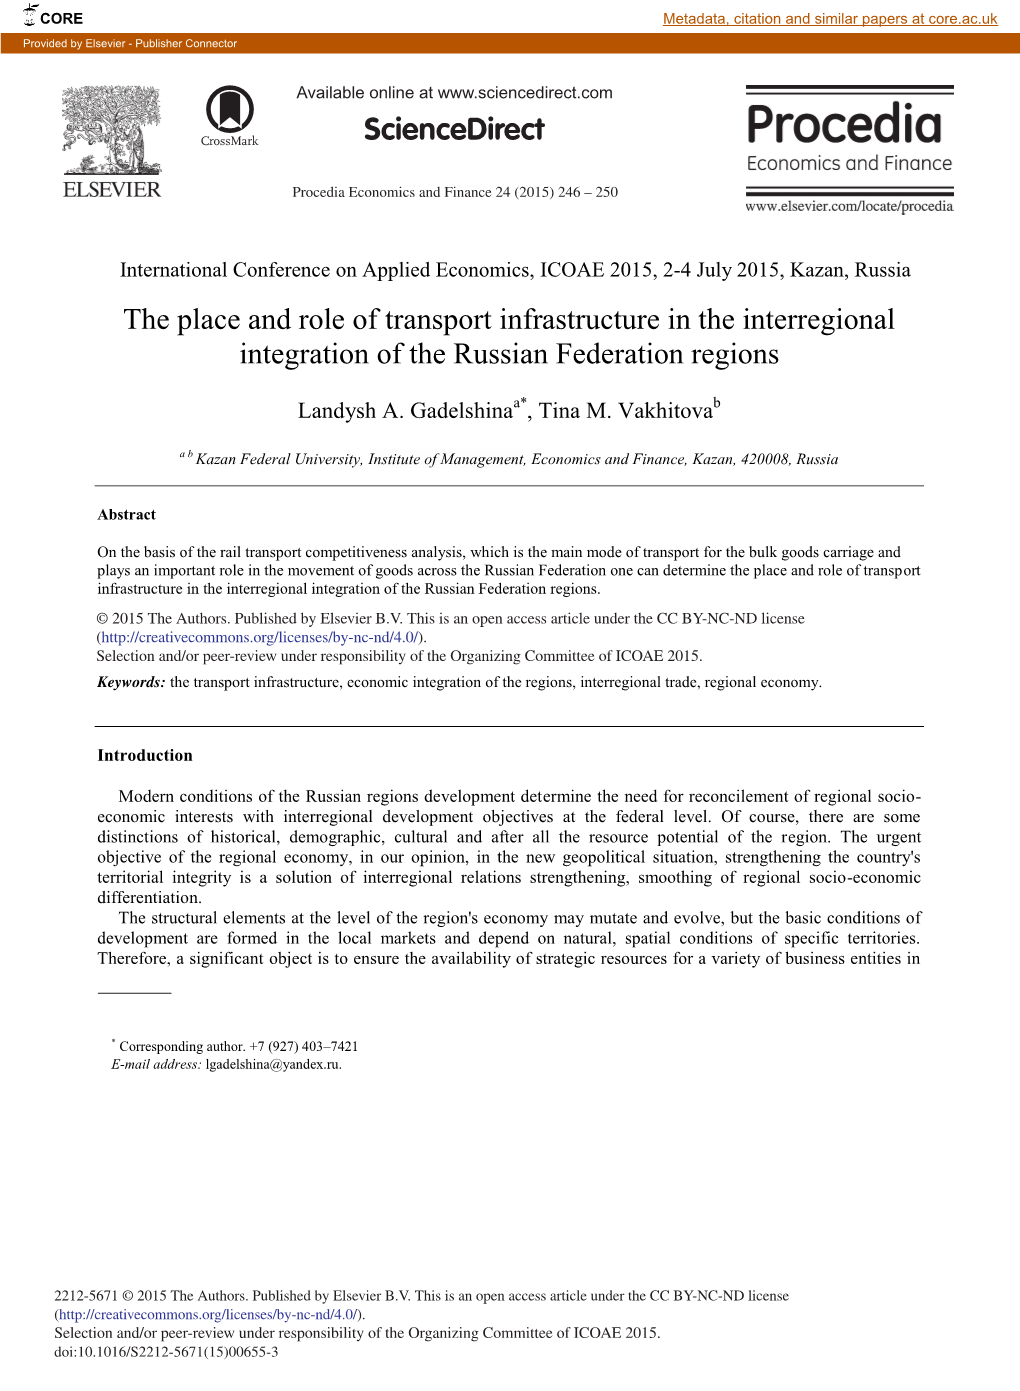 The Place and Role of Transport Infrastructure in the Interregional Integration of the Russian Federation Regions